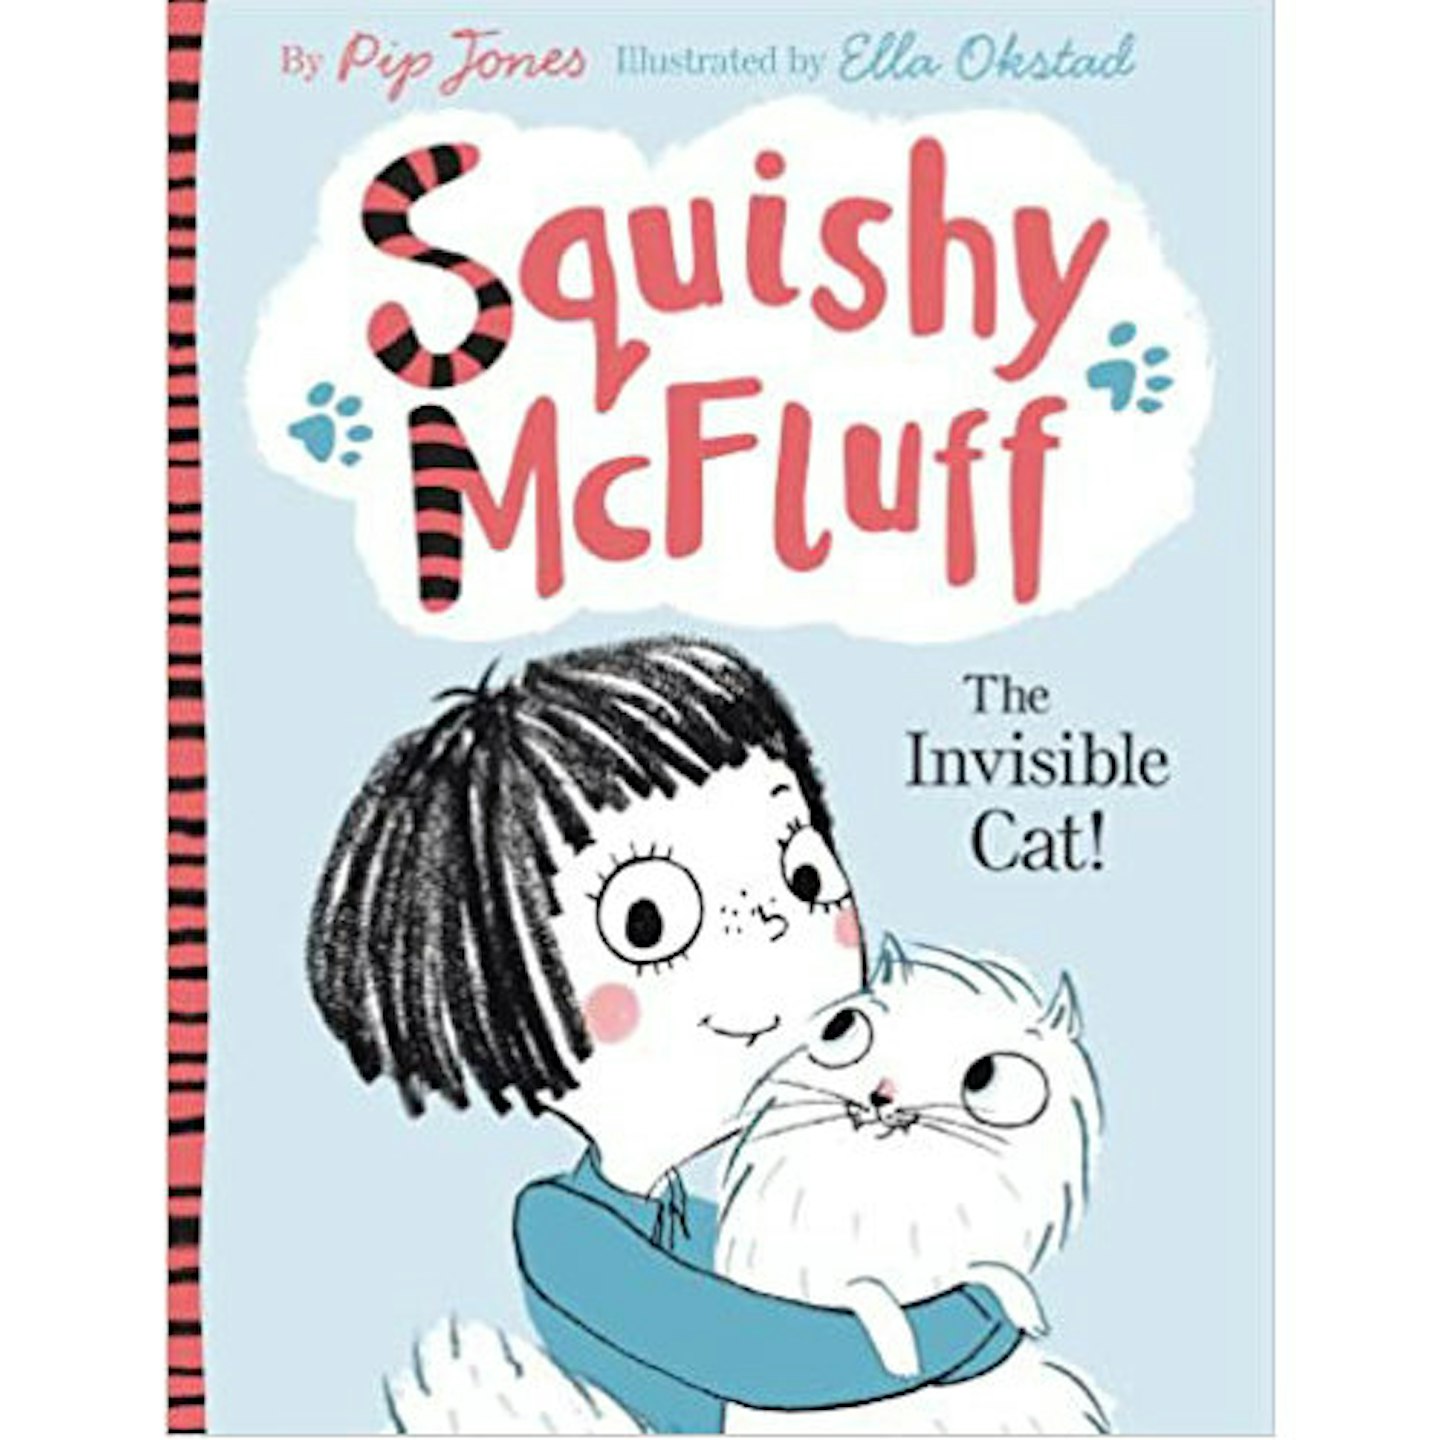 Squishy McFluff: The Invisible Cat by Pip Jones